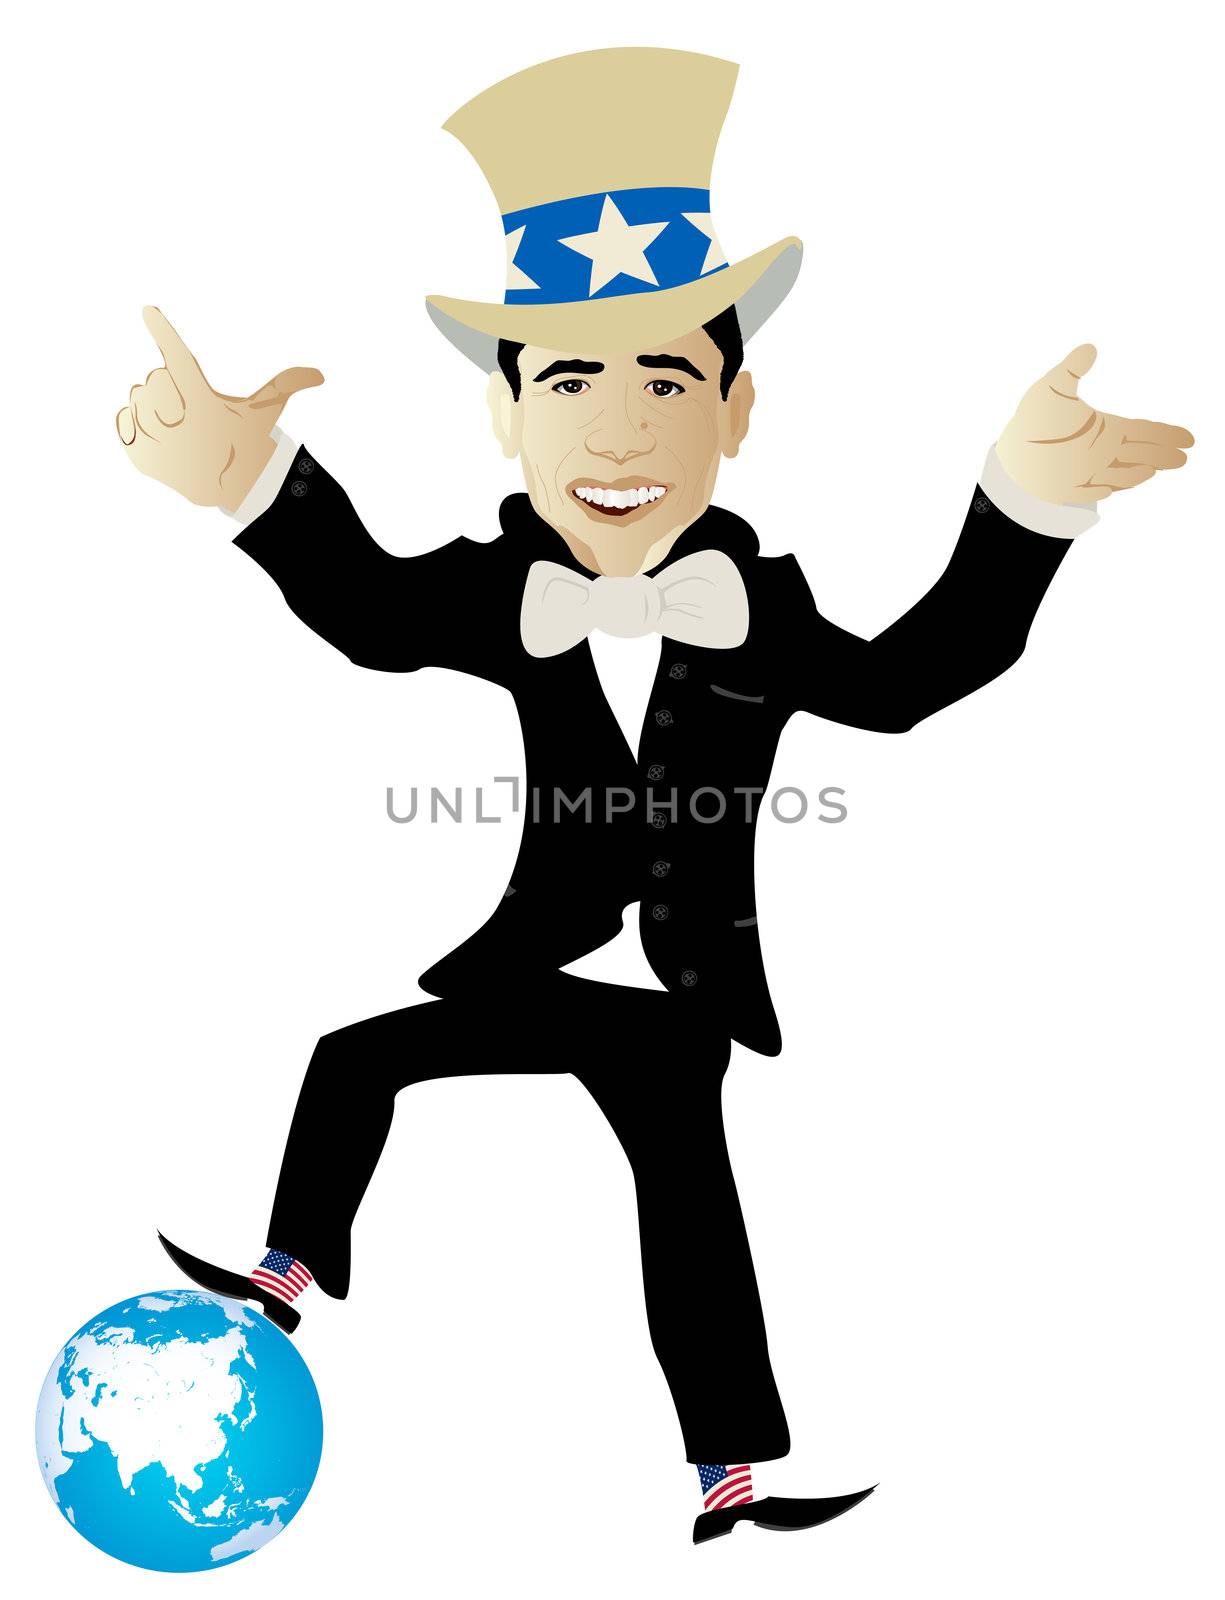 politician playing with earth globe